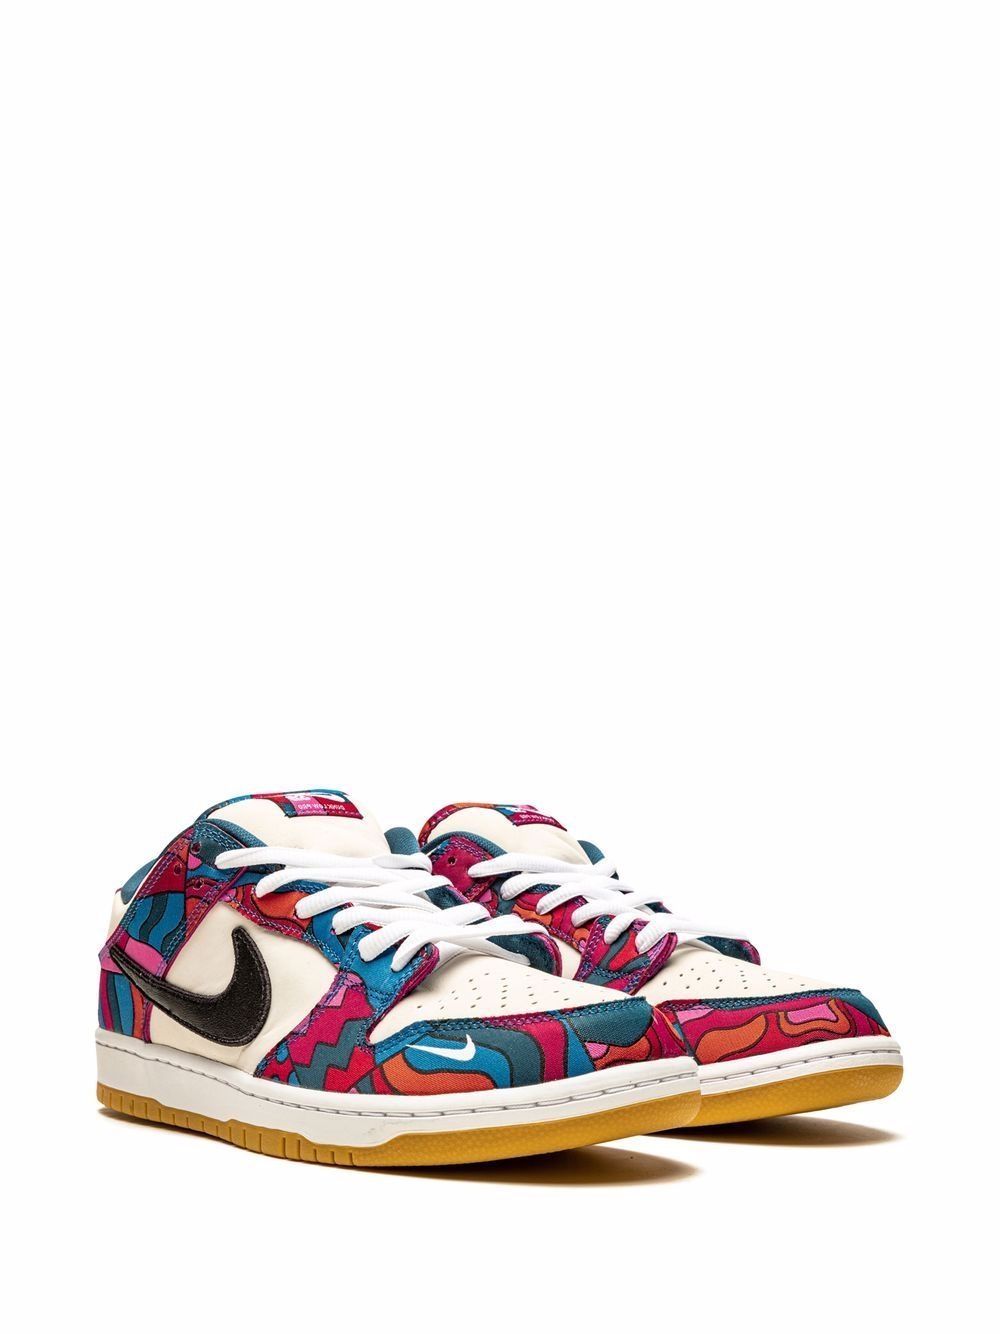 x Parra Dunk Low SB "Abstract Art" sneakers - 2